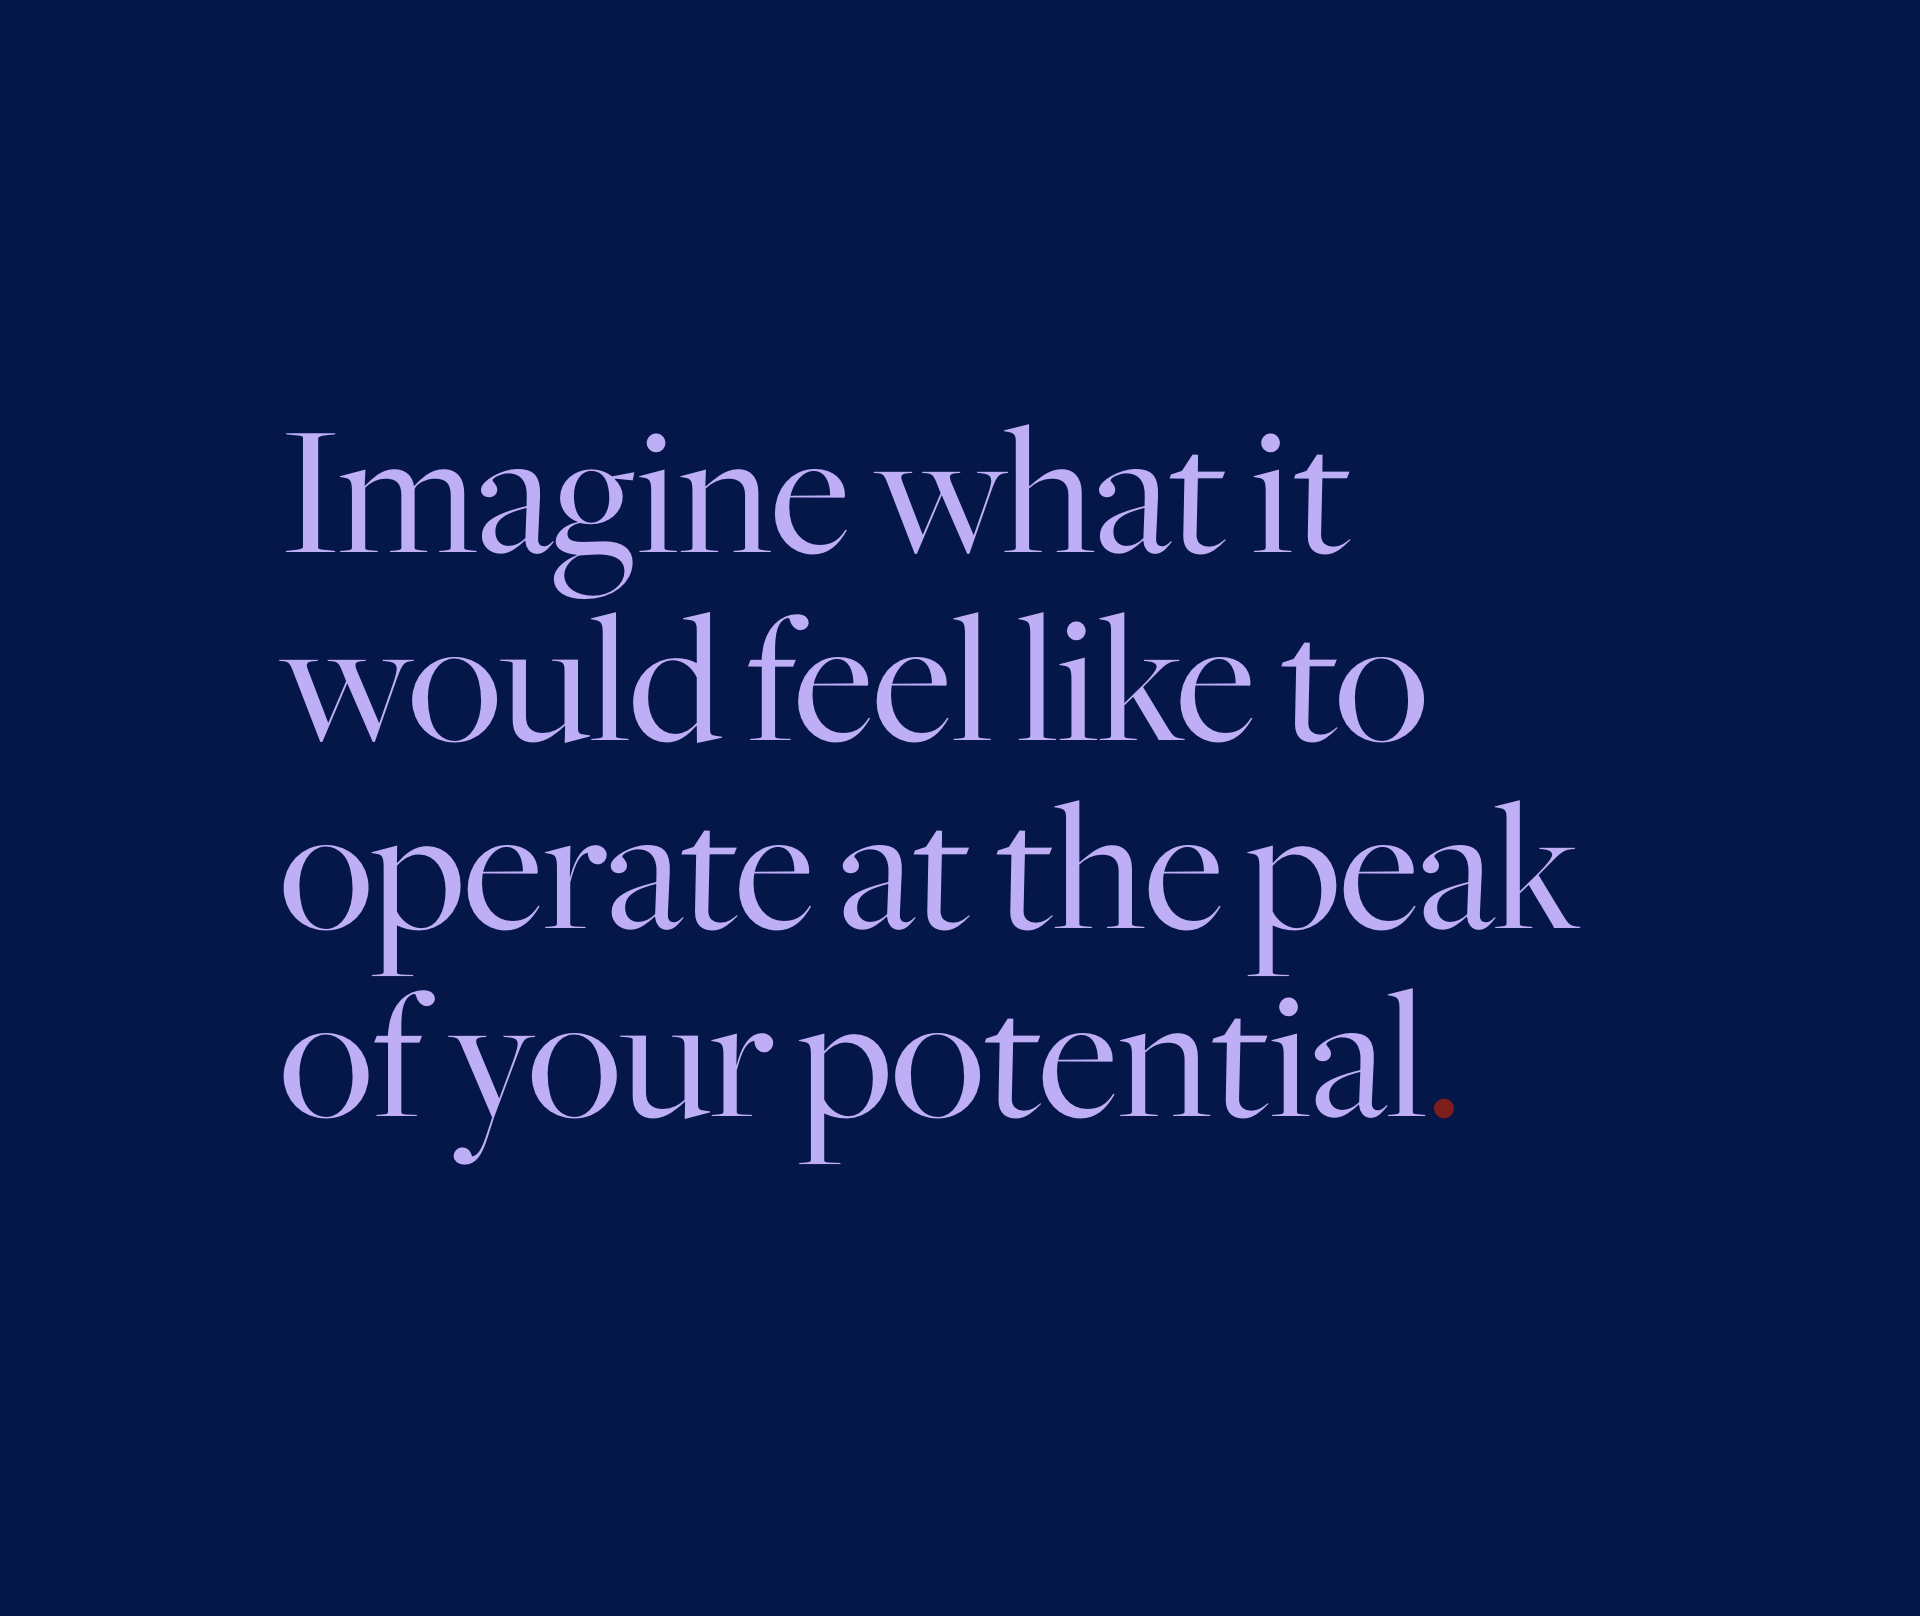 Imagine what it would feel like to operate at the peak of your potential.